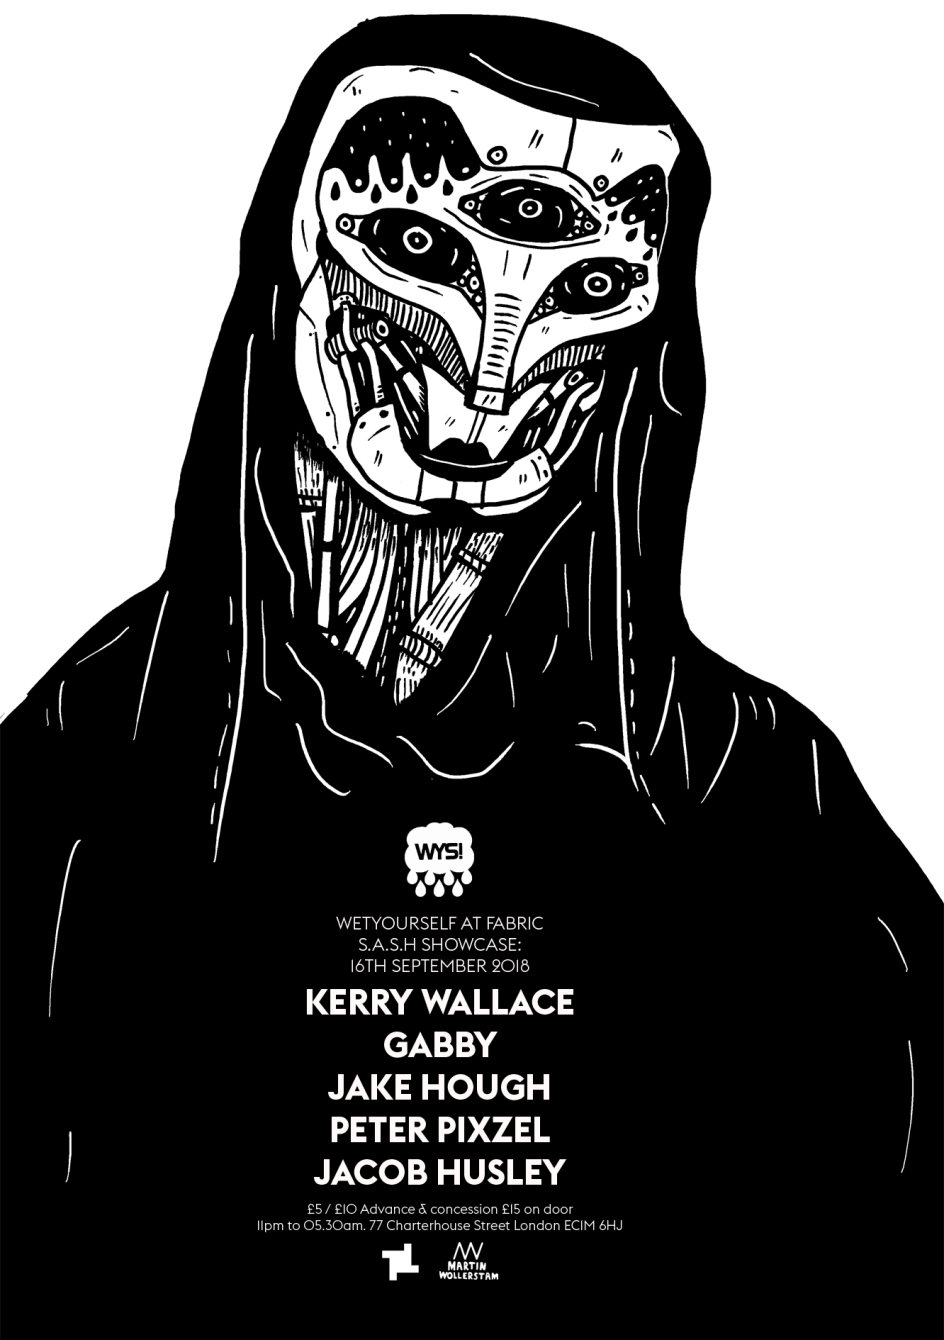 Sundays at fabric: WYS! X S.A.S.H Showcase with Kerry Wallace, GABBY, Jake Hough - Flyer front